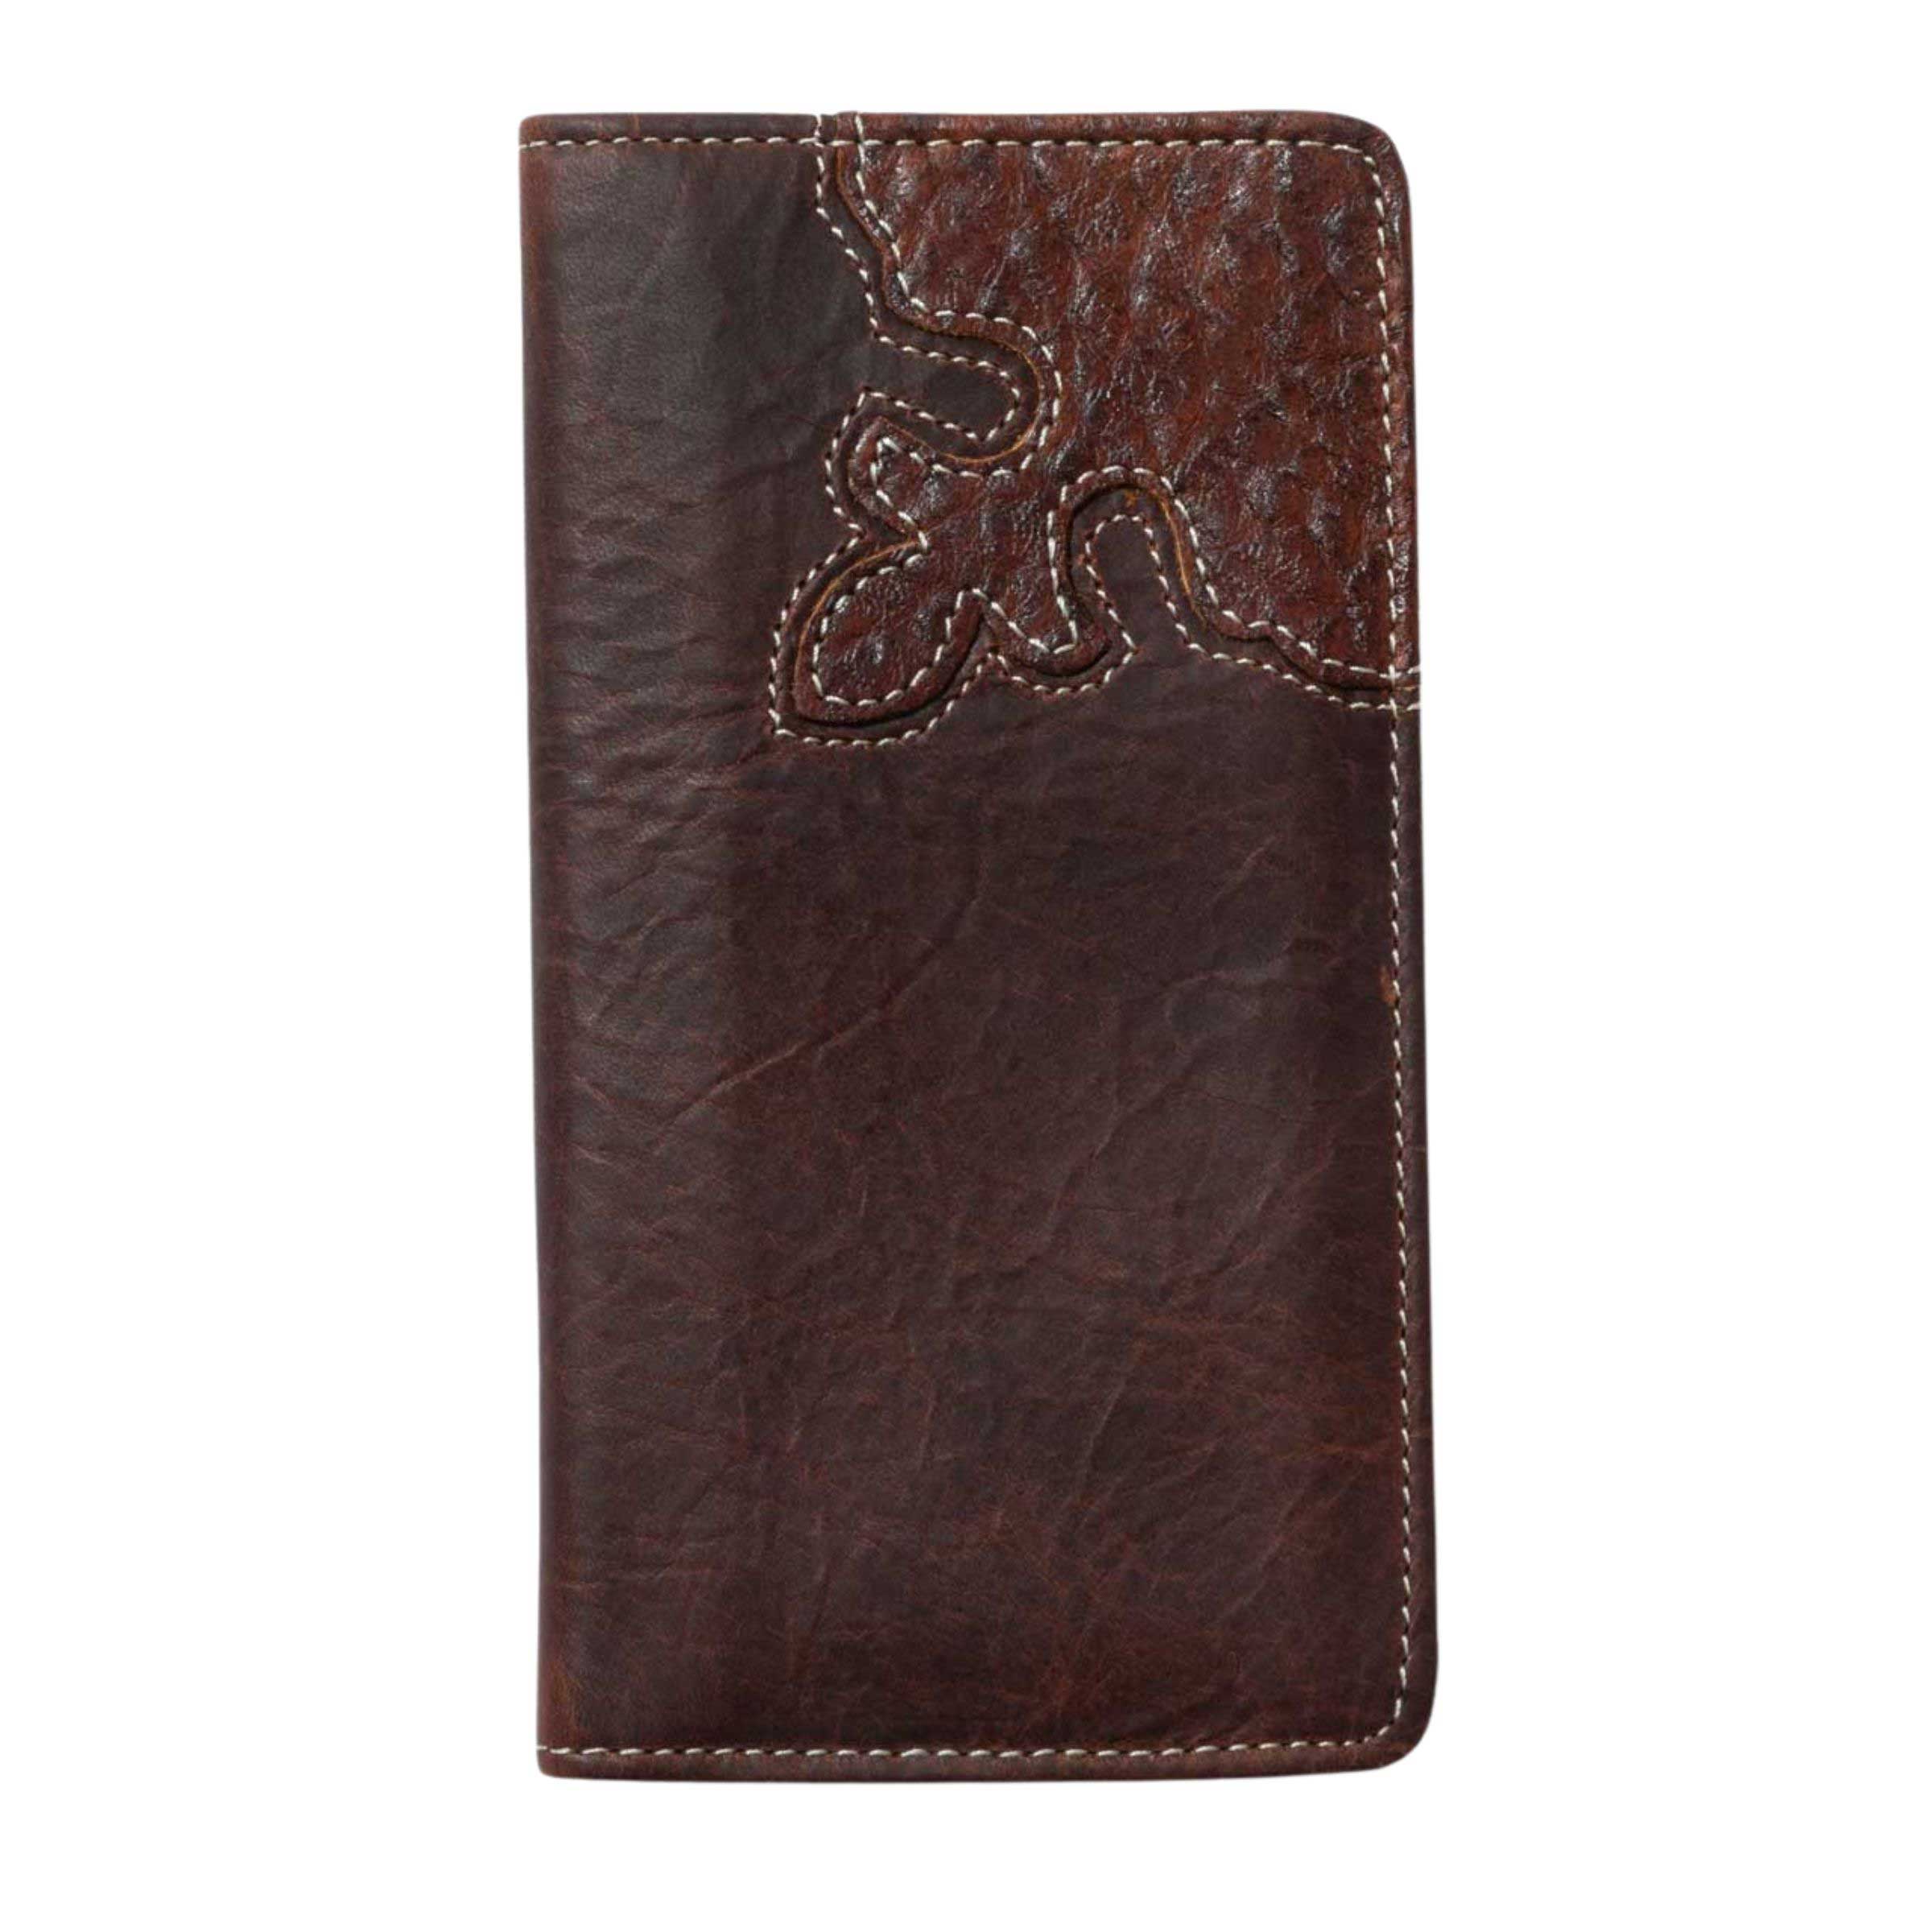 Leather checkbook wallet